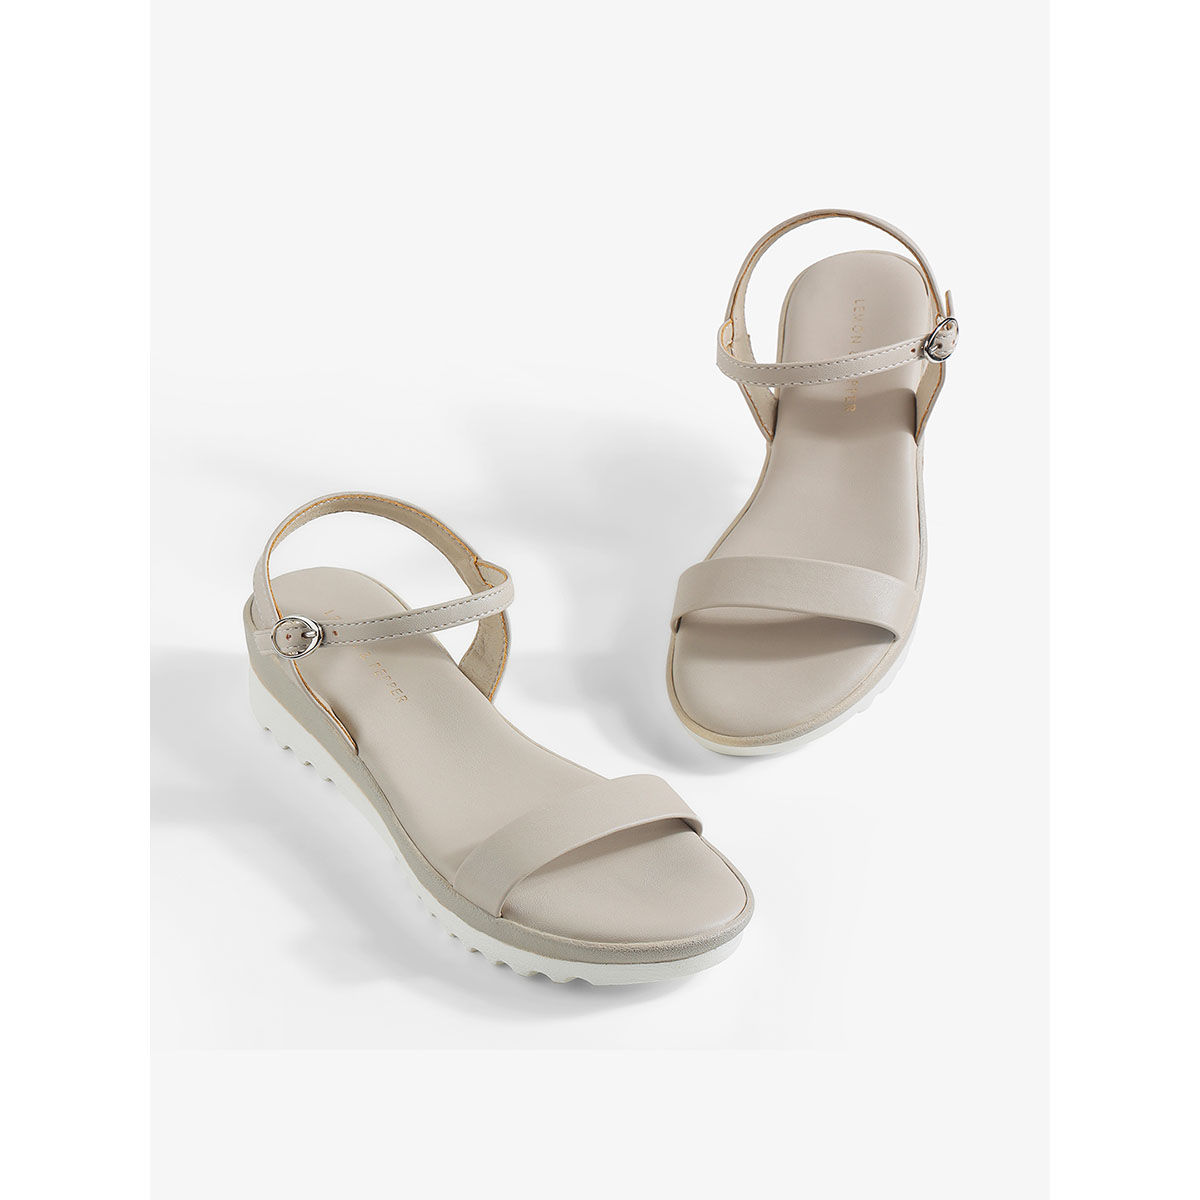 Discover more than 193 lemon and pepper sandals super hot